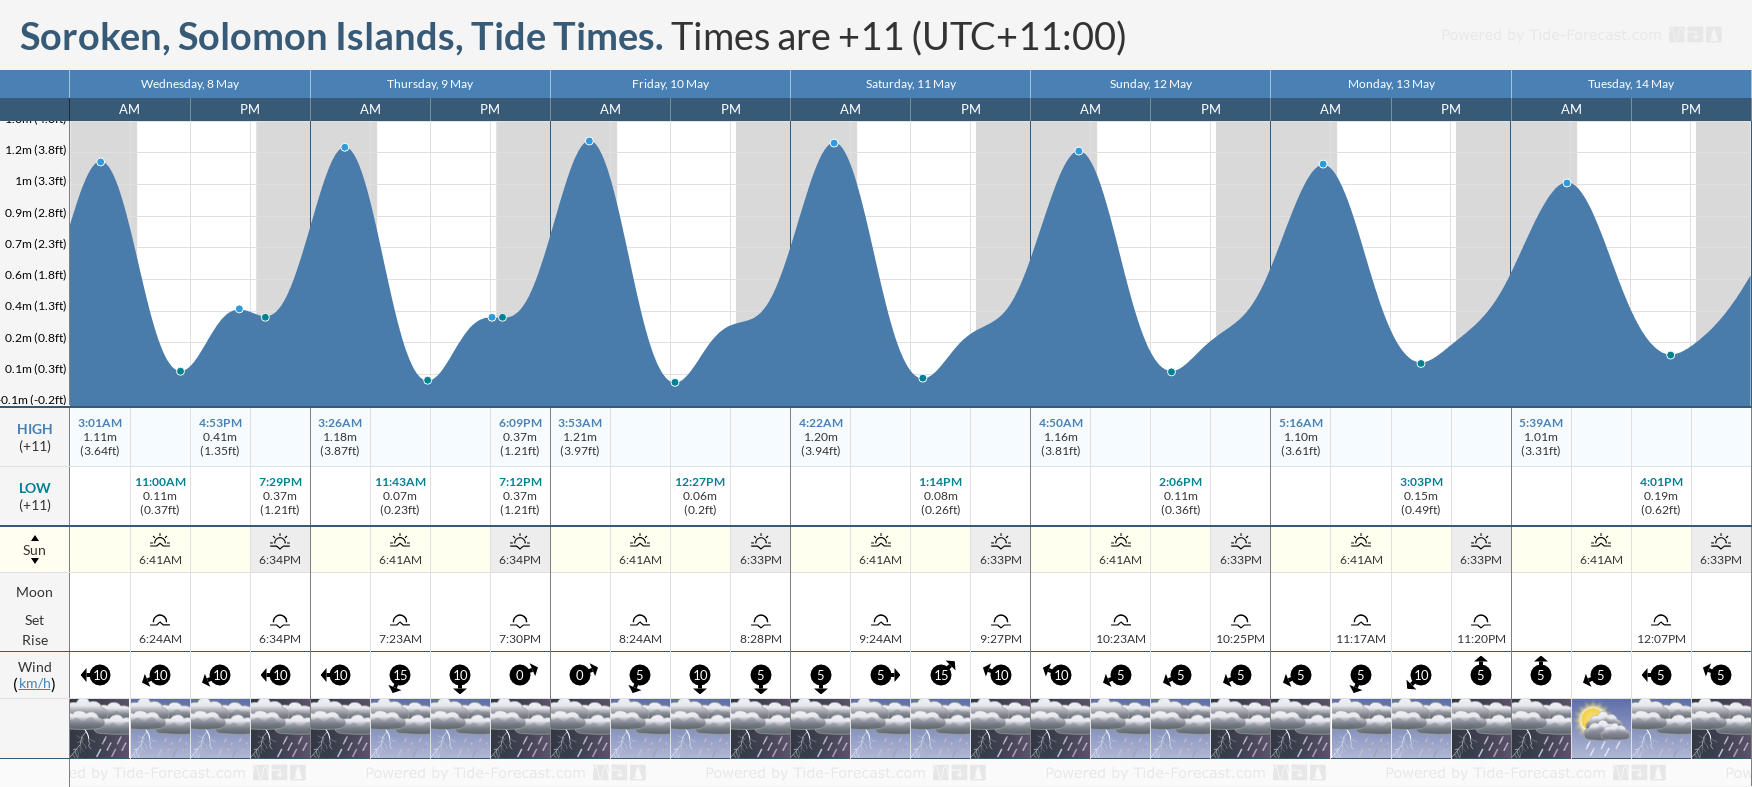 Soroken, Solomon Islands Tide Chart including high and low tide tide times for the next 7 days